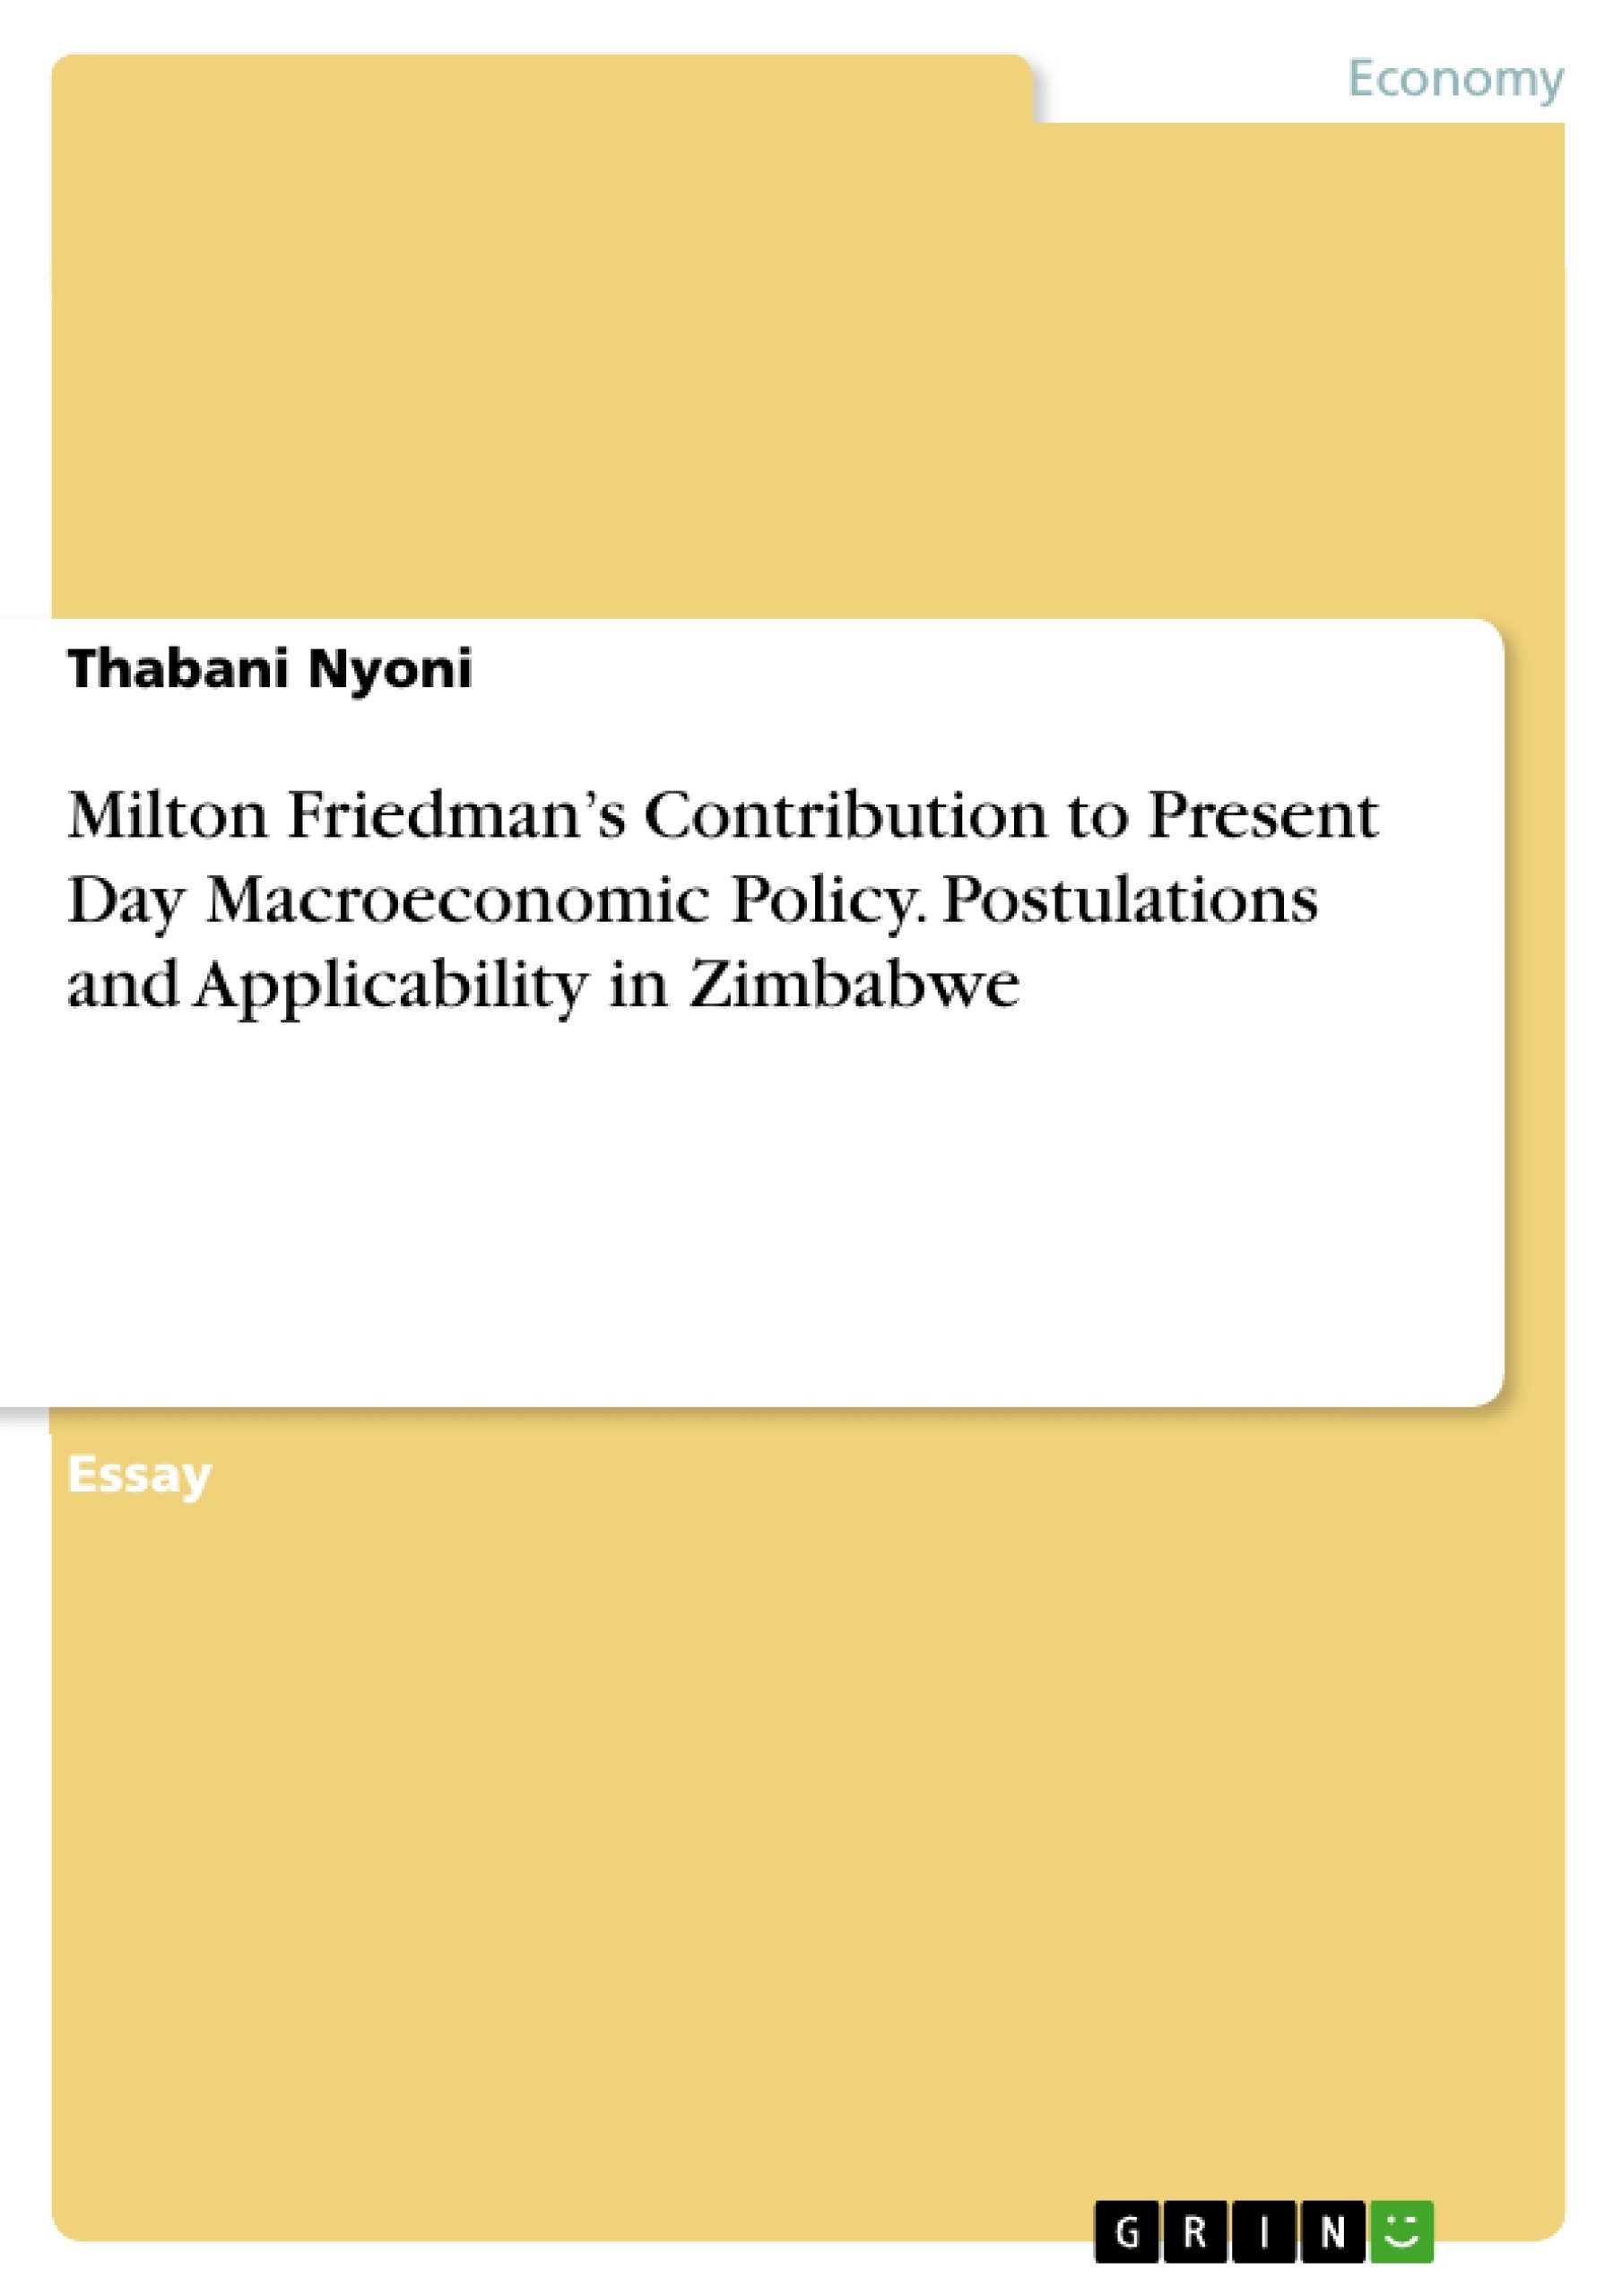 Titel: Milton Friedman’s Contribution to Present Day Macroeconomic Policy. Postulations and Applicability in Zimbabwe